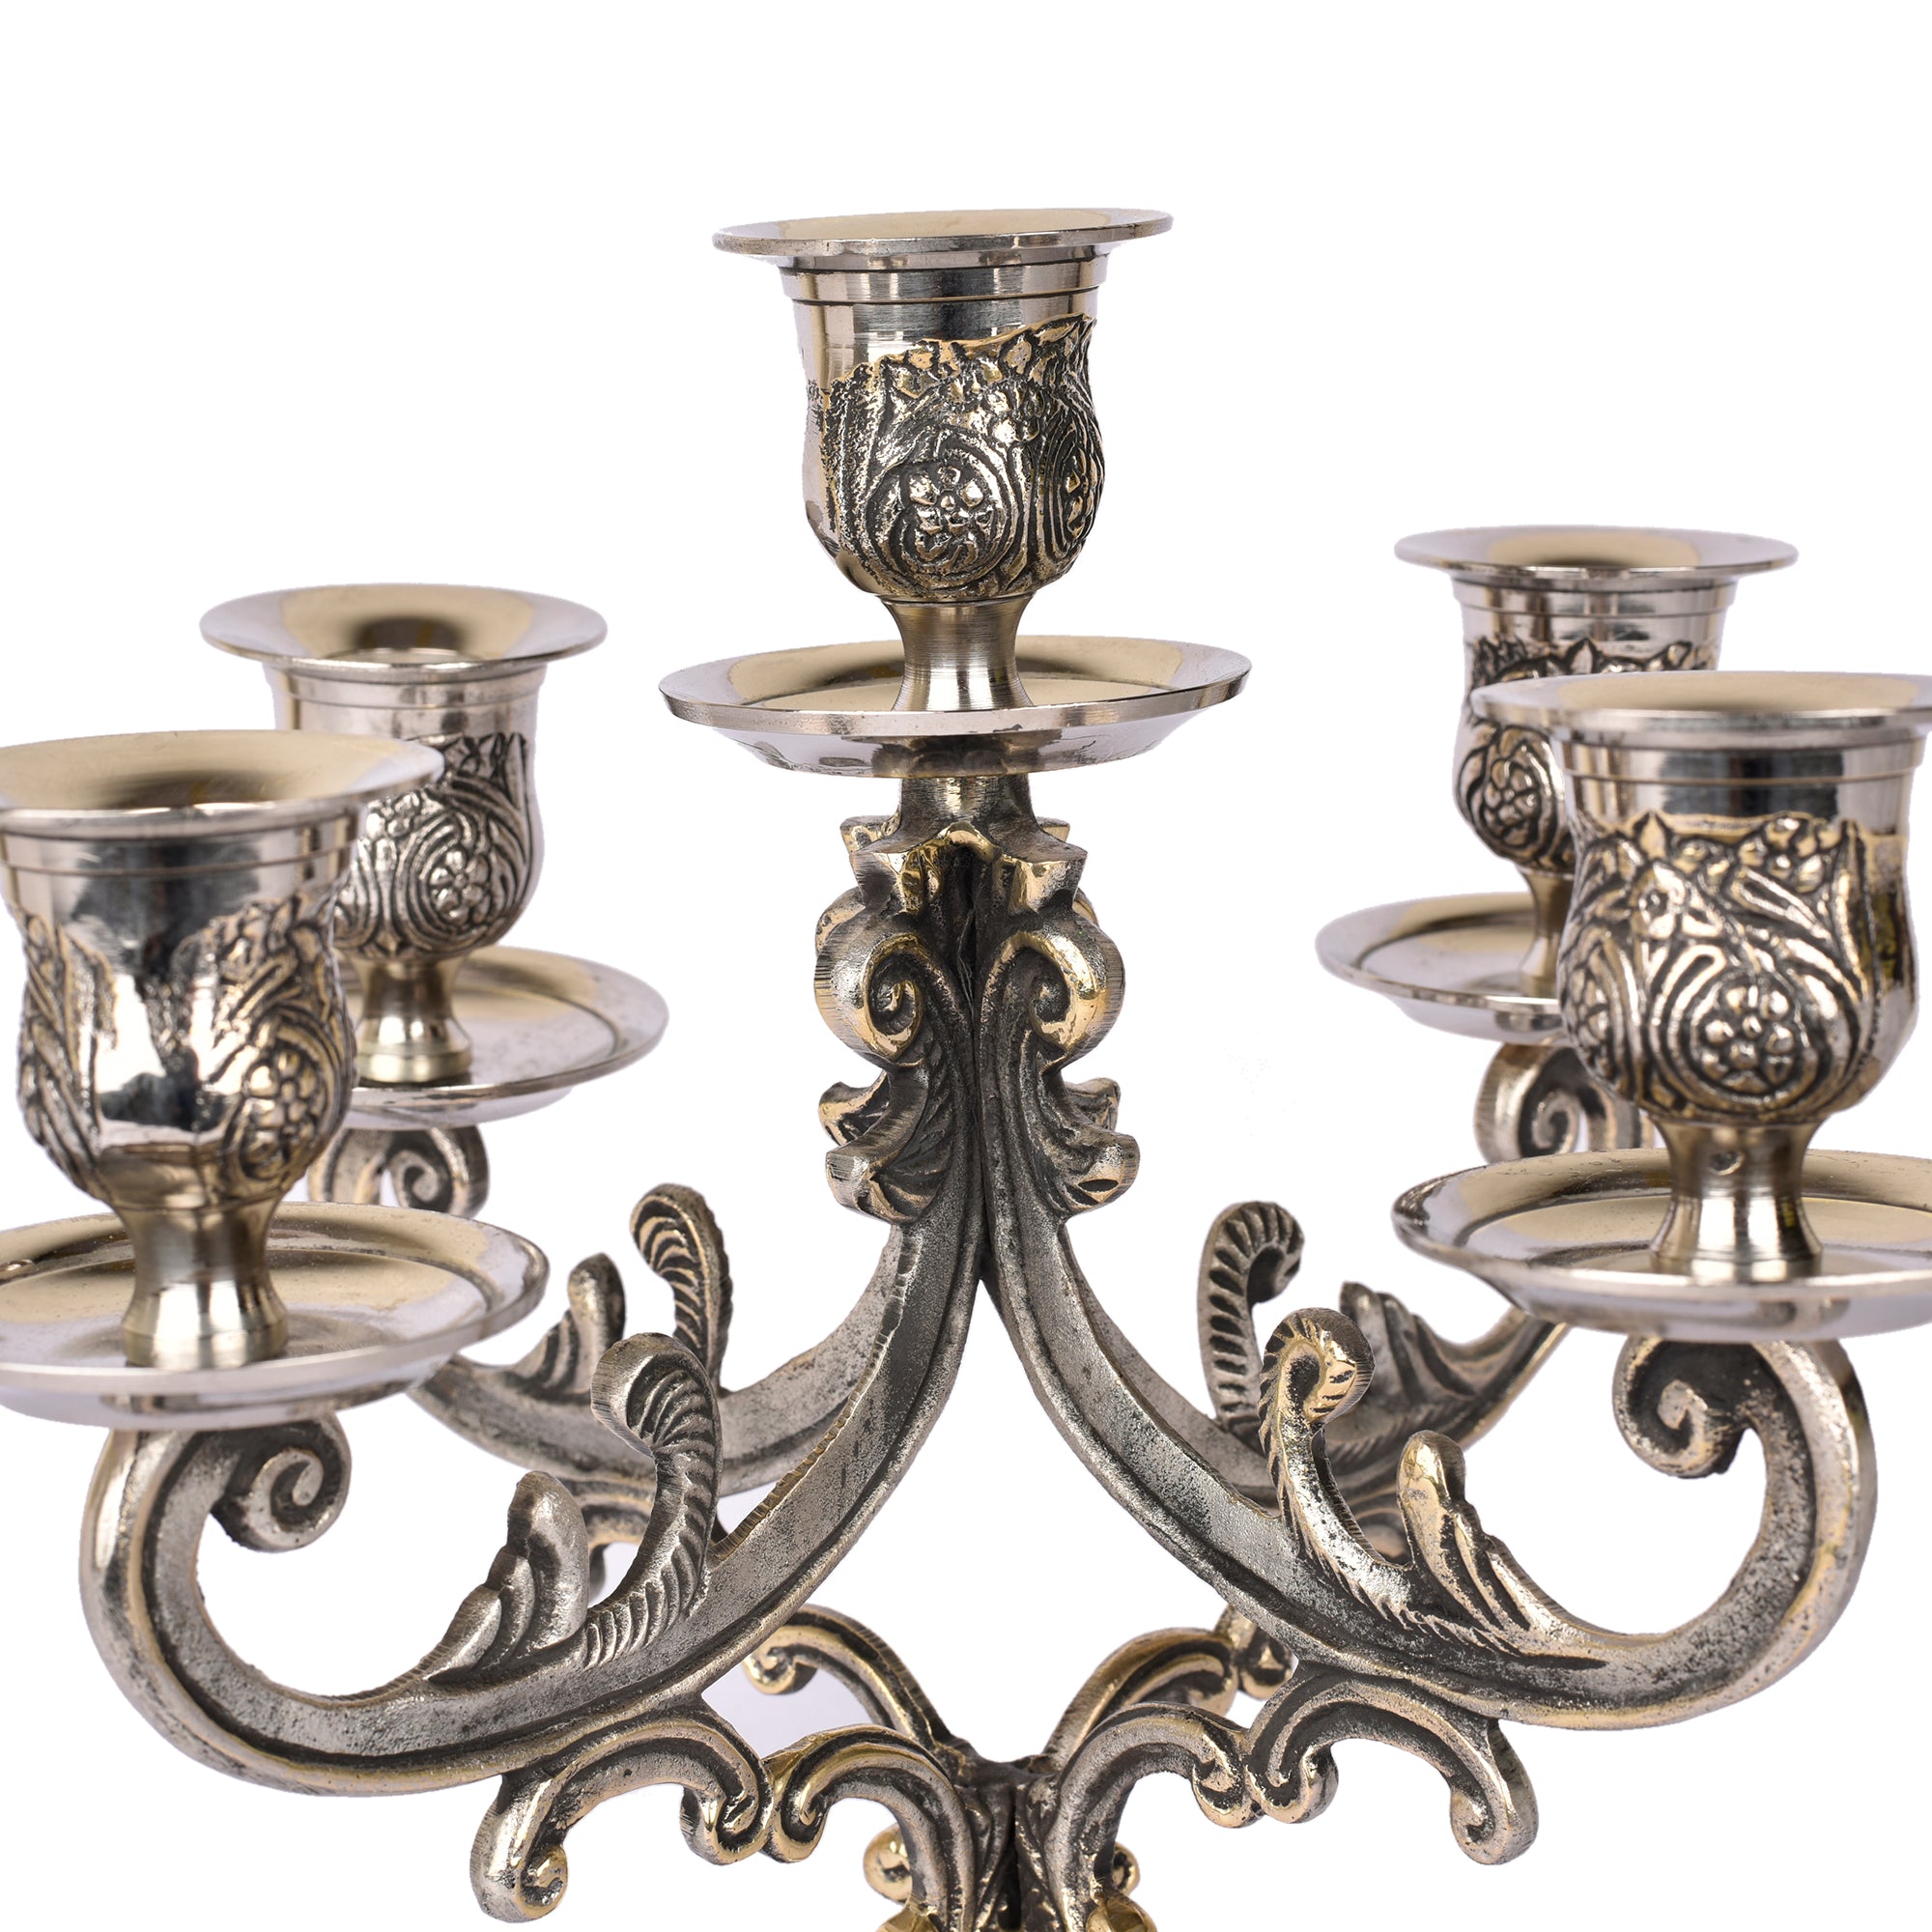 Victorian 5 Pillar Candle Stand Silver Finish